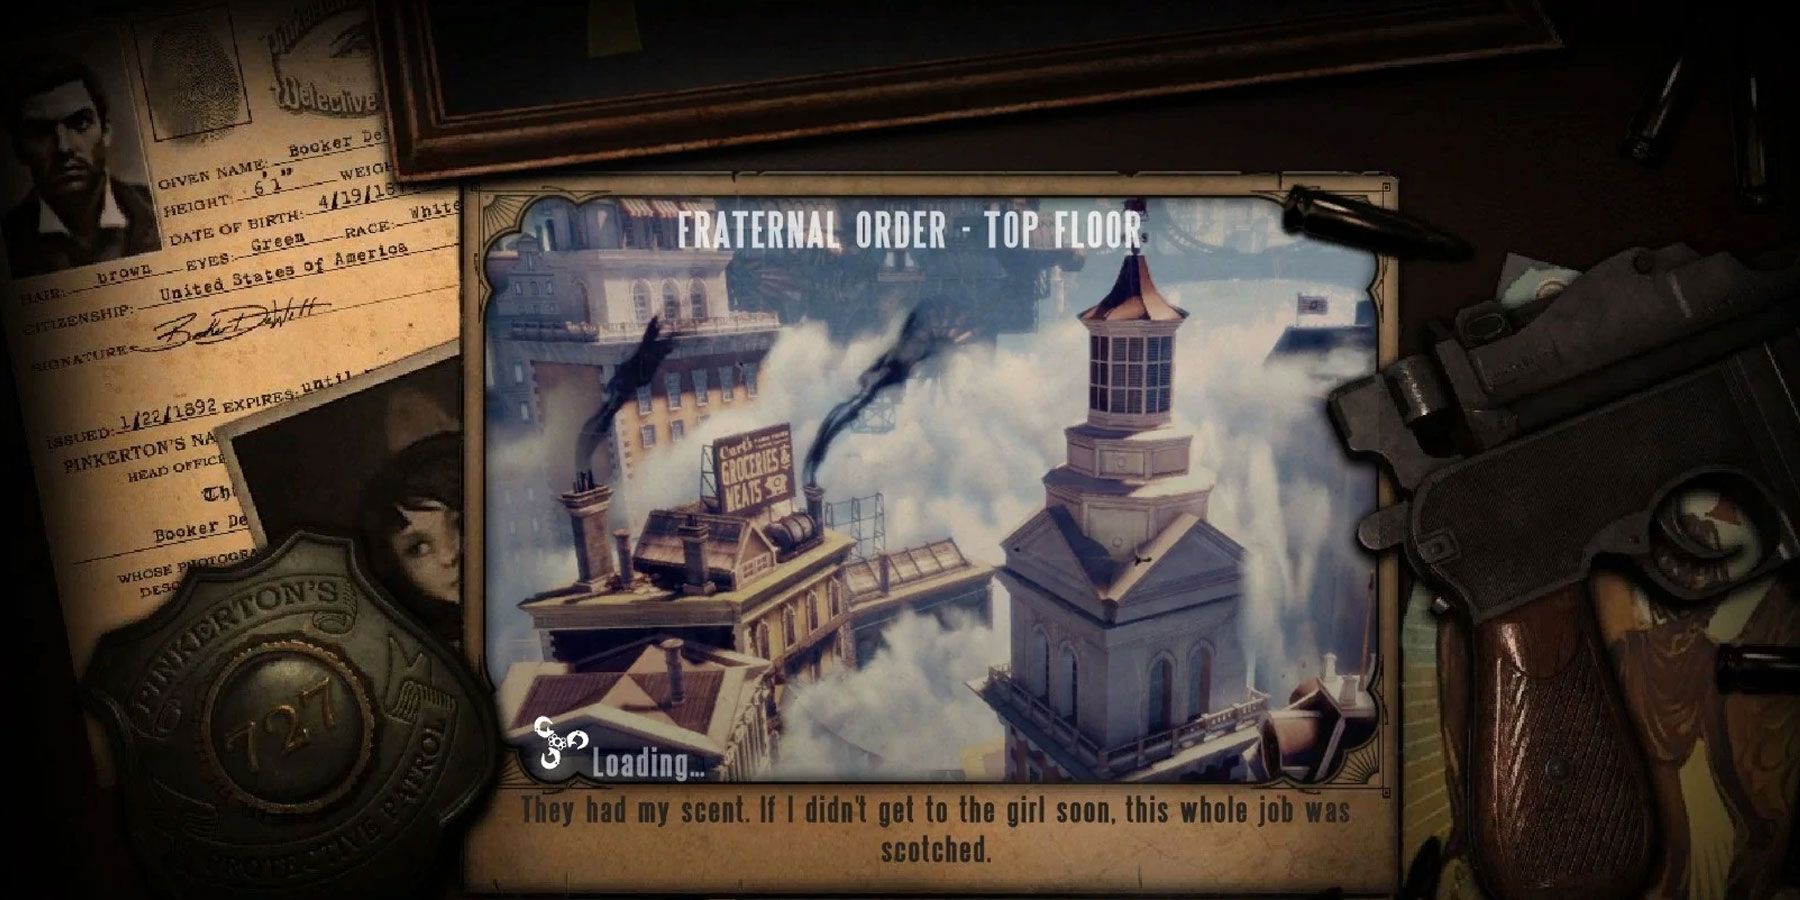 BioShock 4 Should Get More Personal With Its Philosophies